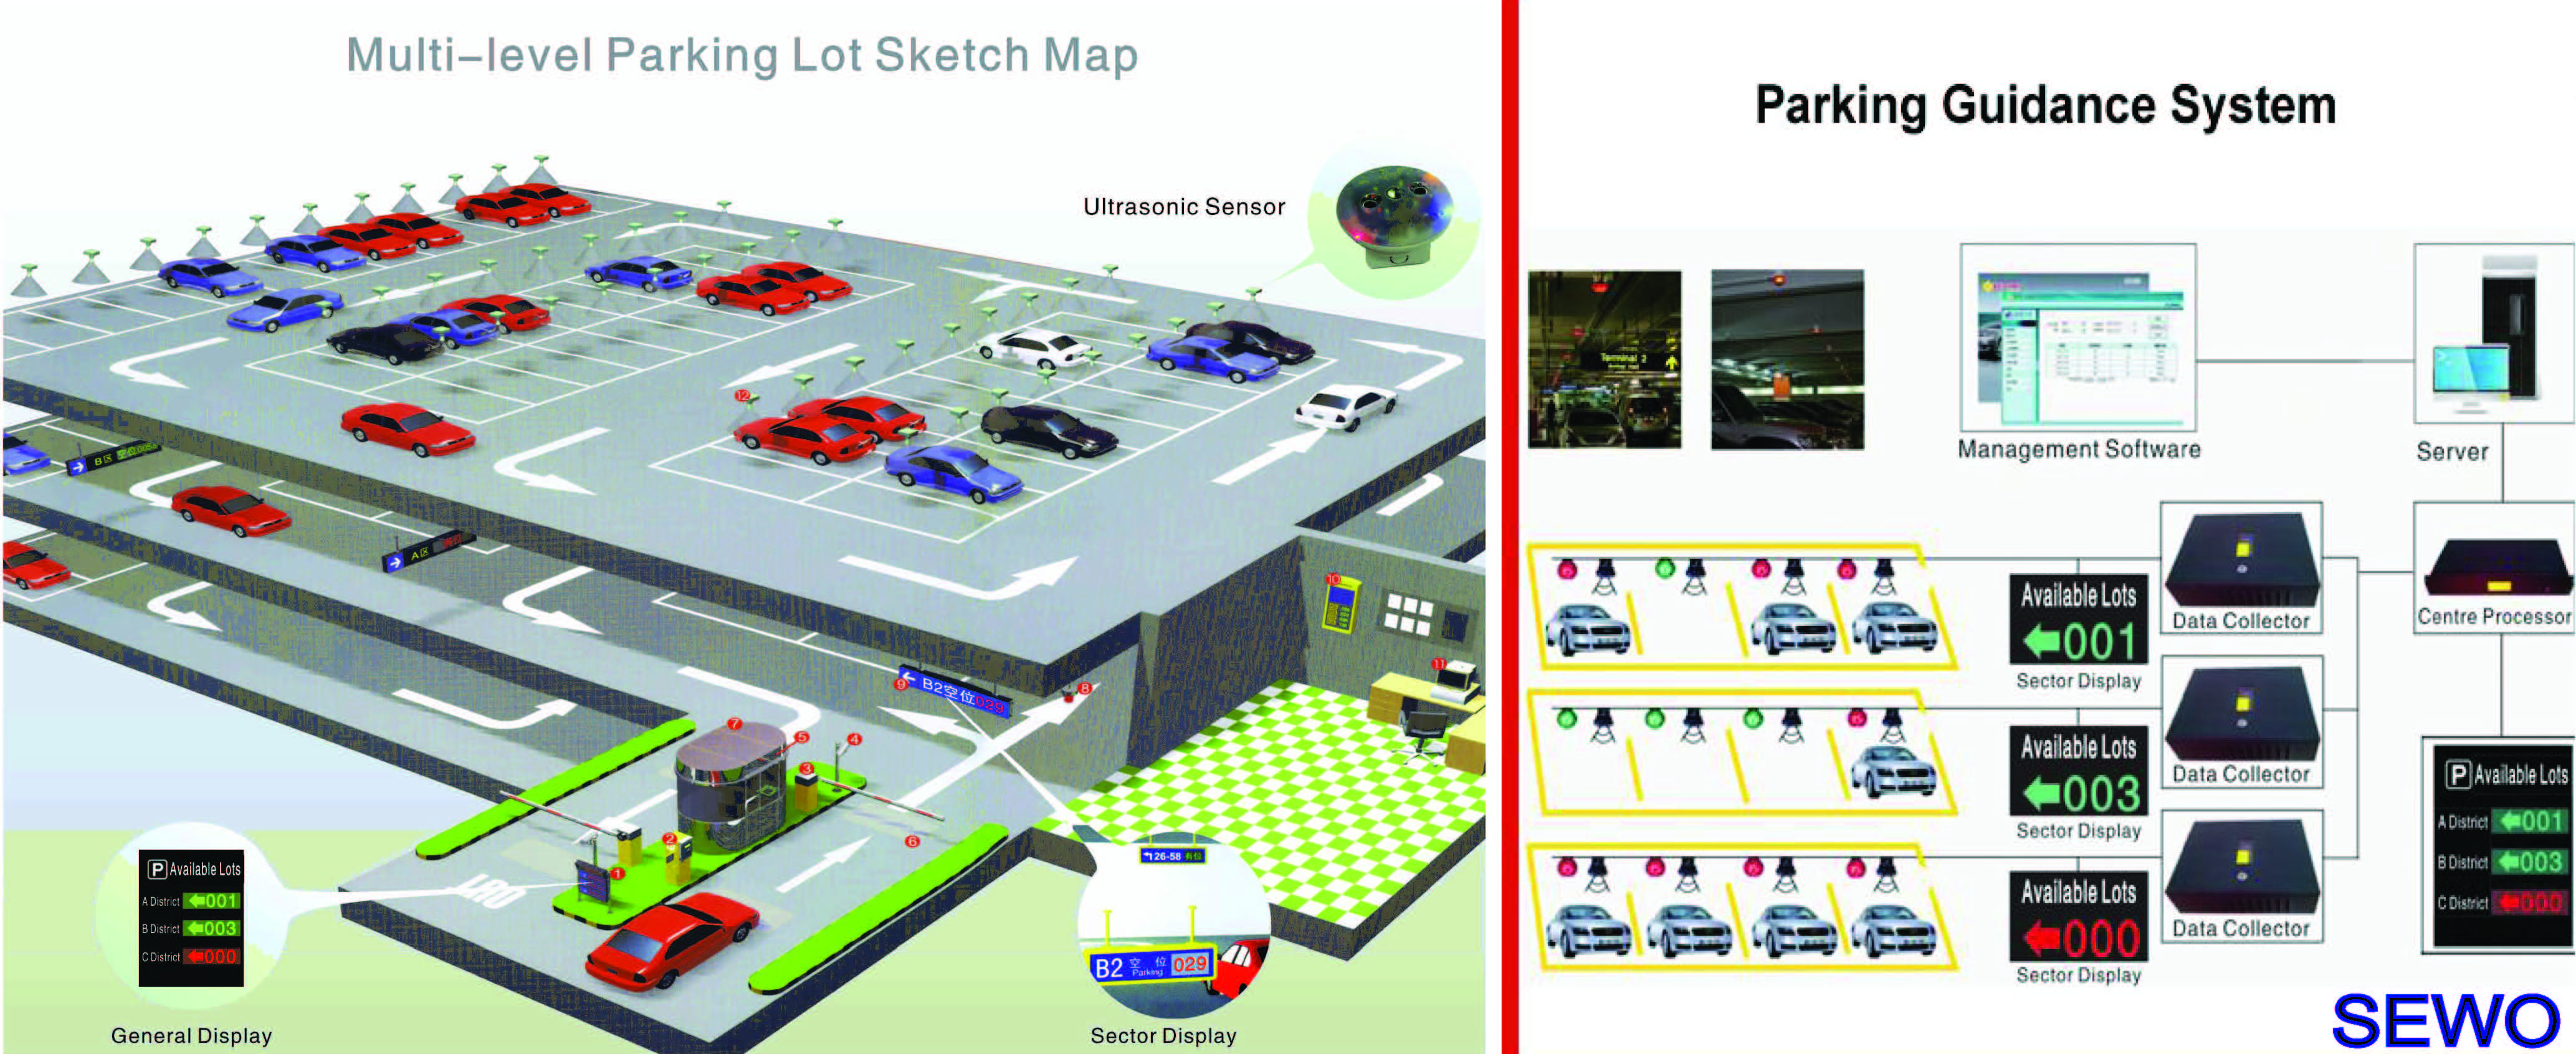 2-parking guidance system